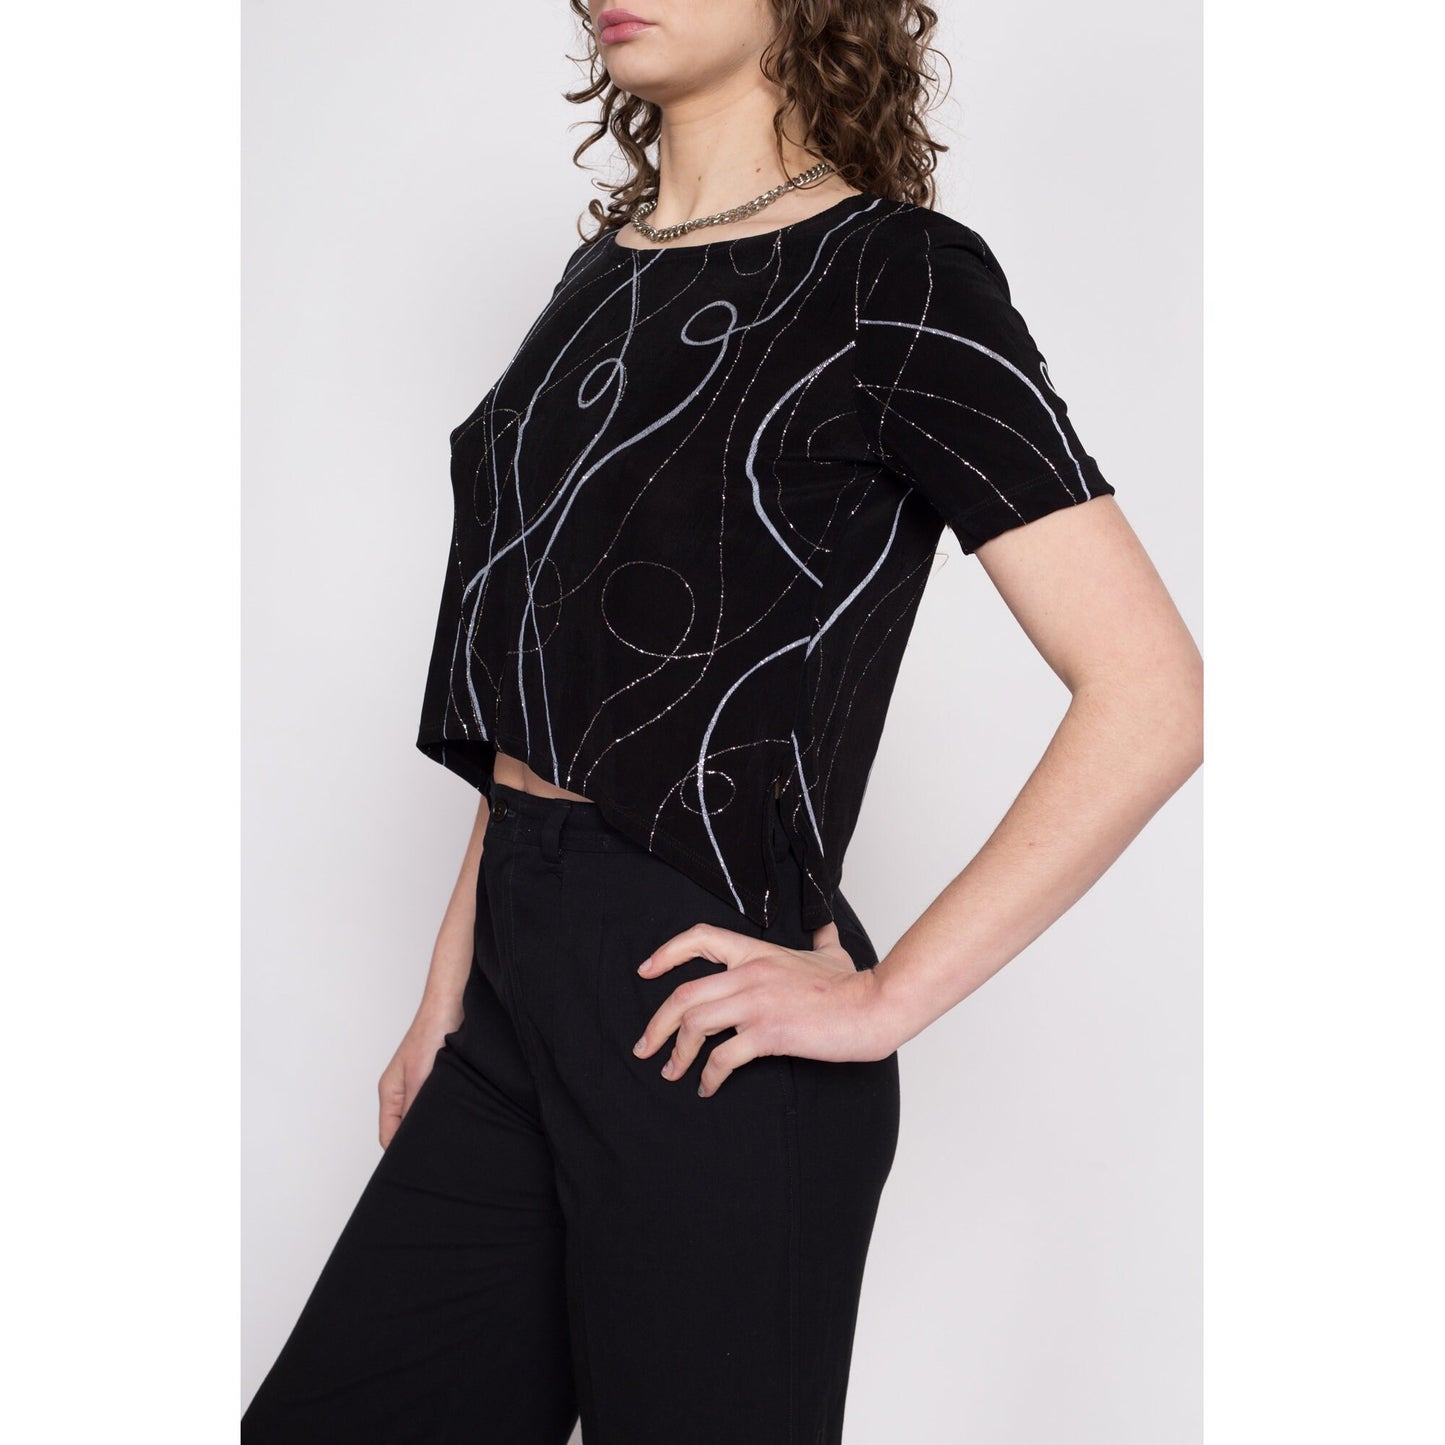 80s Slinky High Low Hem Cropped Blouse - Small to Medium | Vintage Black Abstract Metallic Glam Crop Top